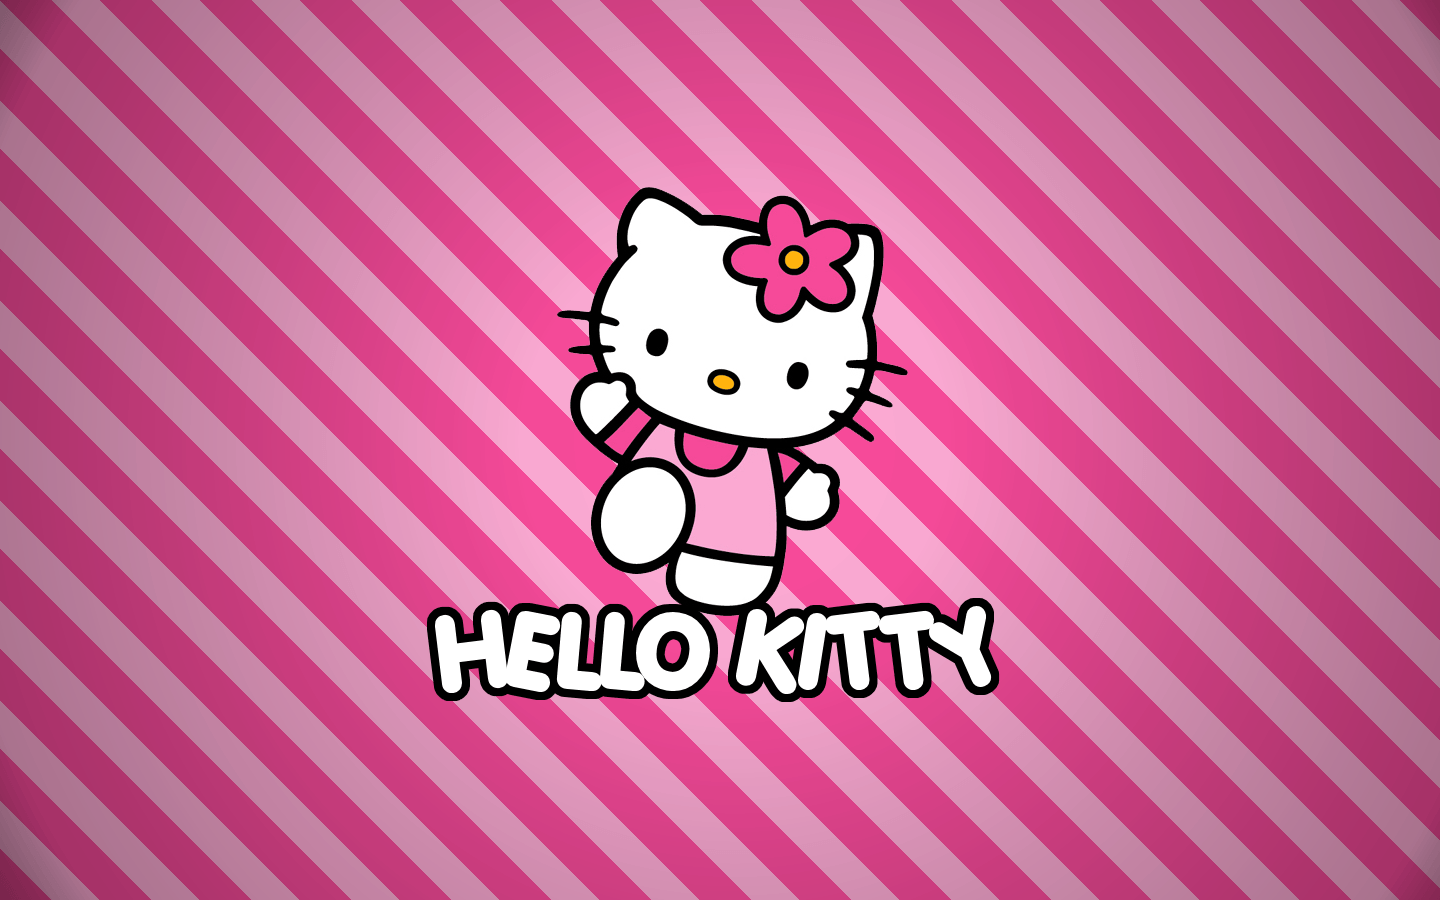 Wallpapers HD Hello Kitty - Wallpaper Cave